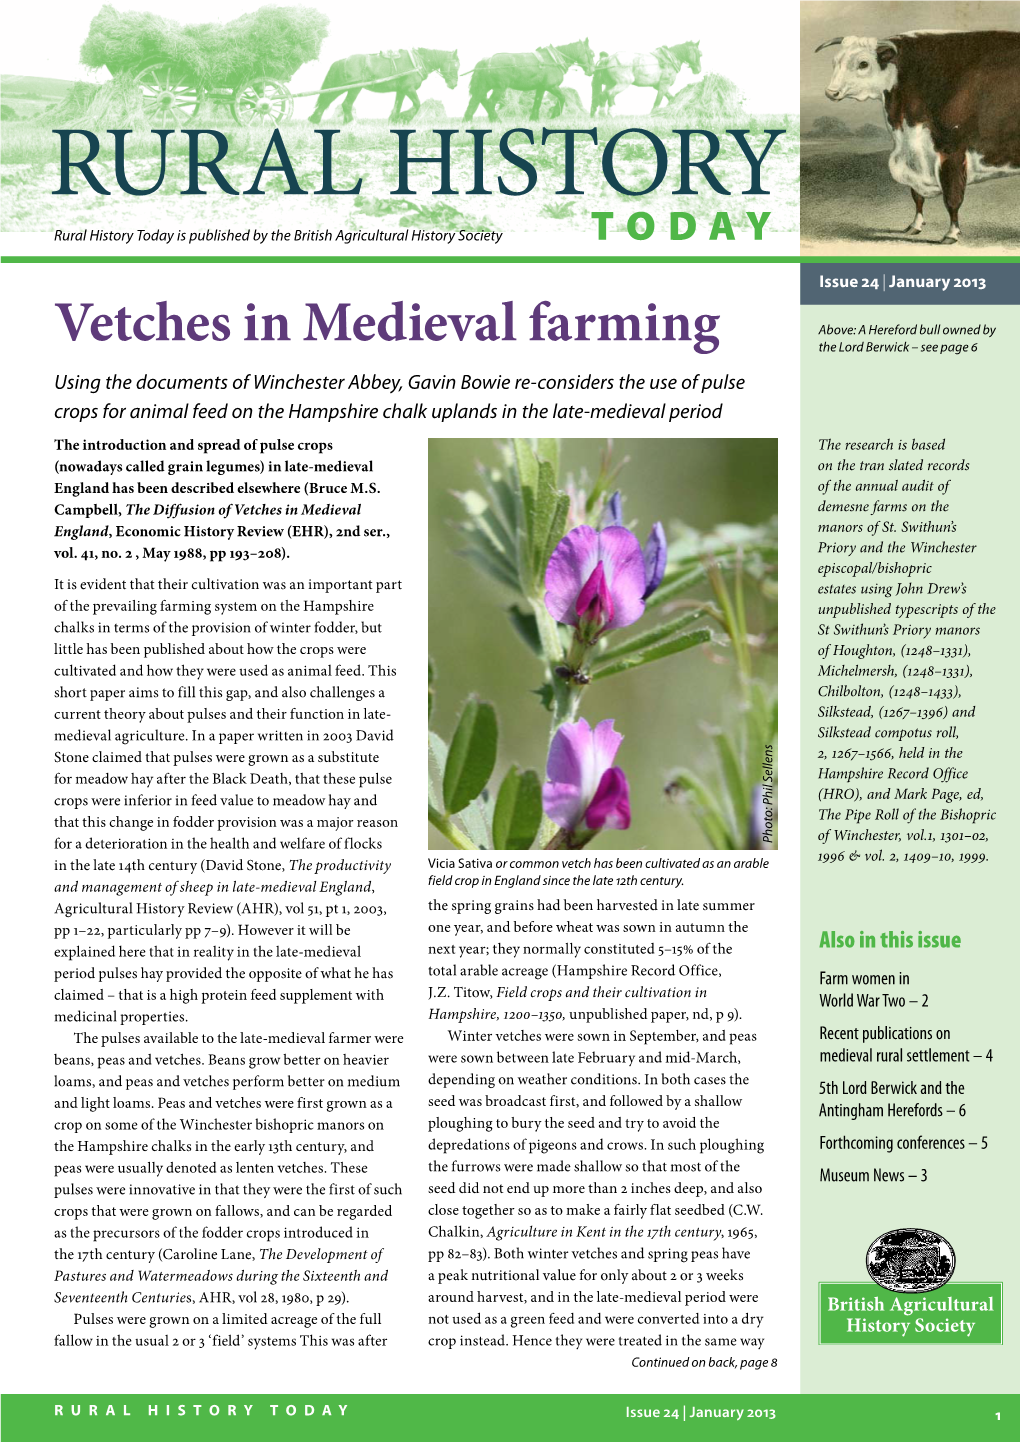 Vetches in Medieval Farming